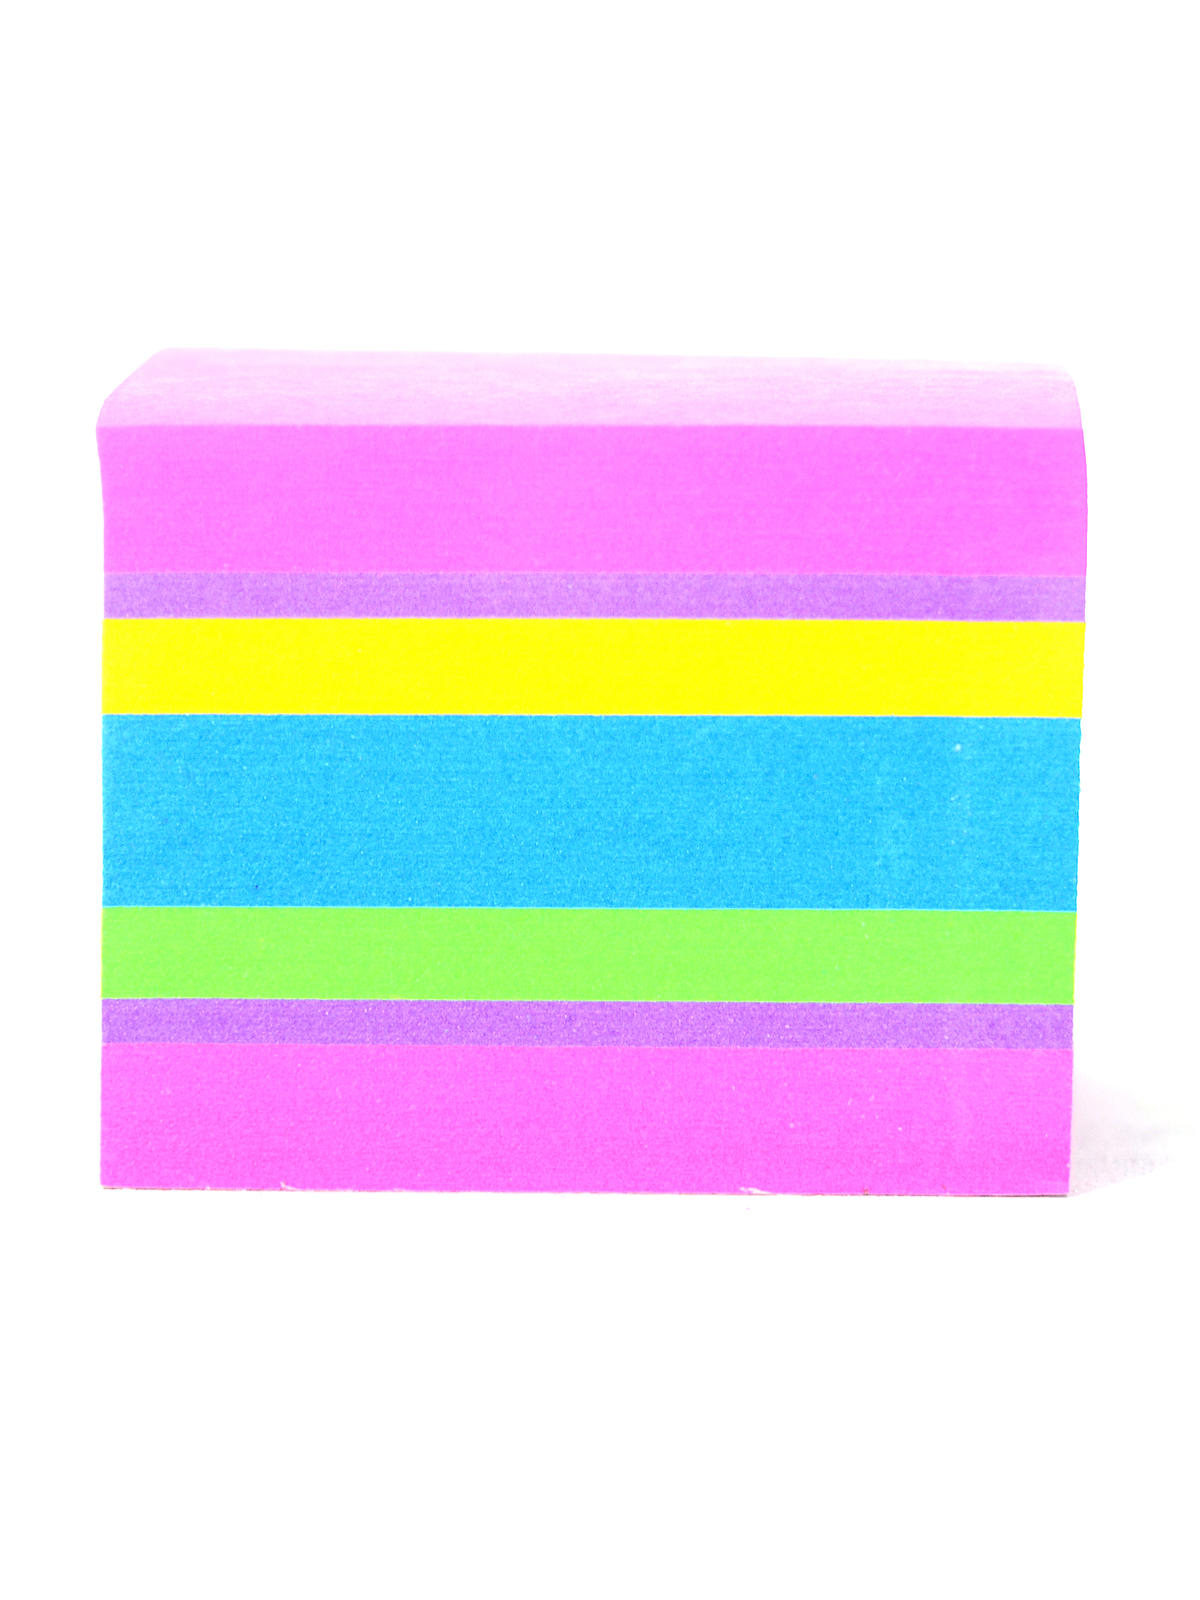 Note Cube 2 In. X 2 In. 3 Assorted Colors Pad Of 400